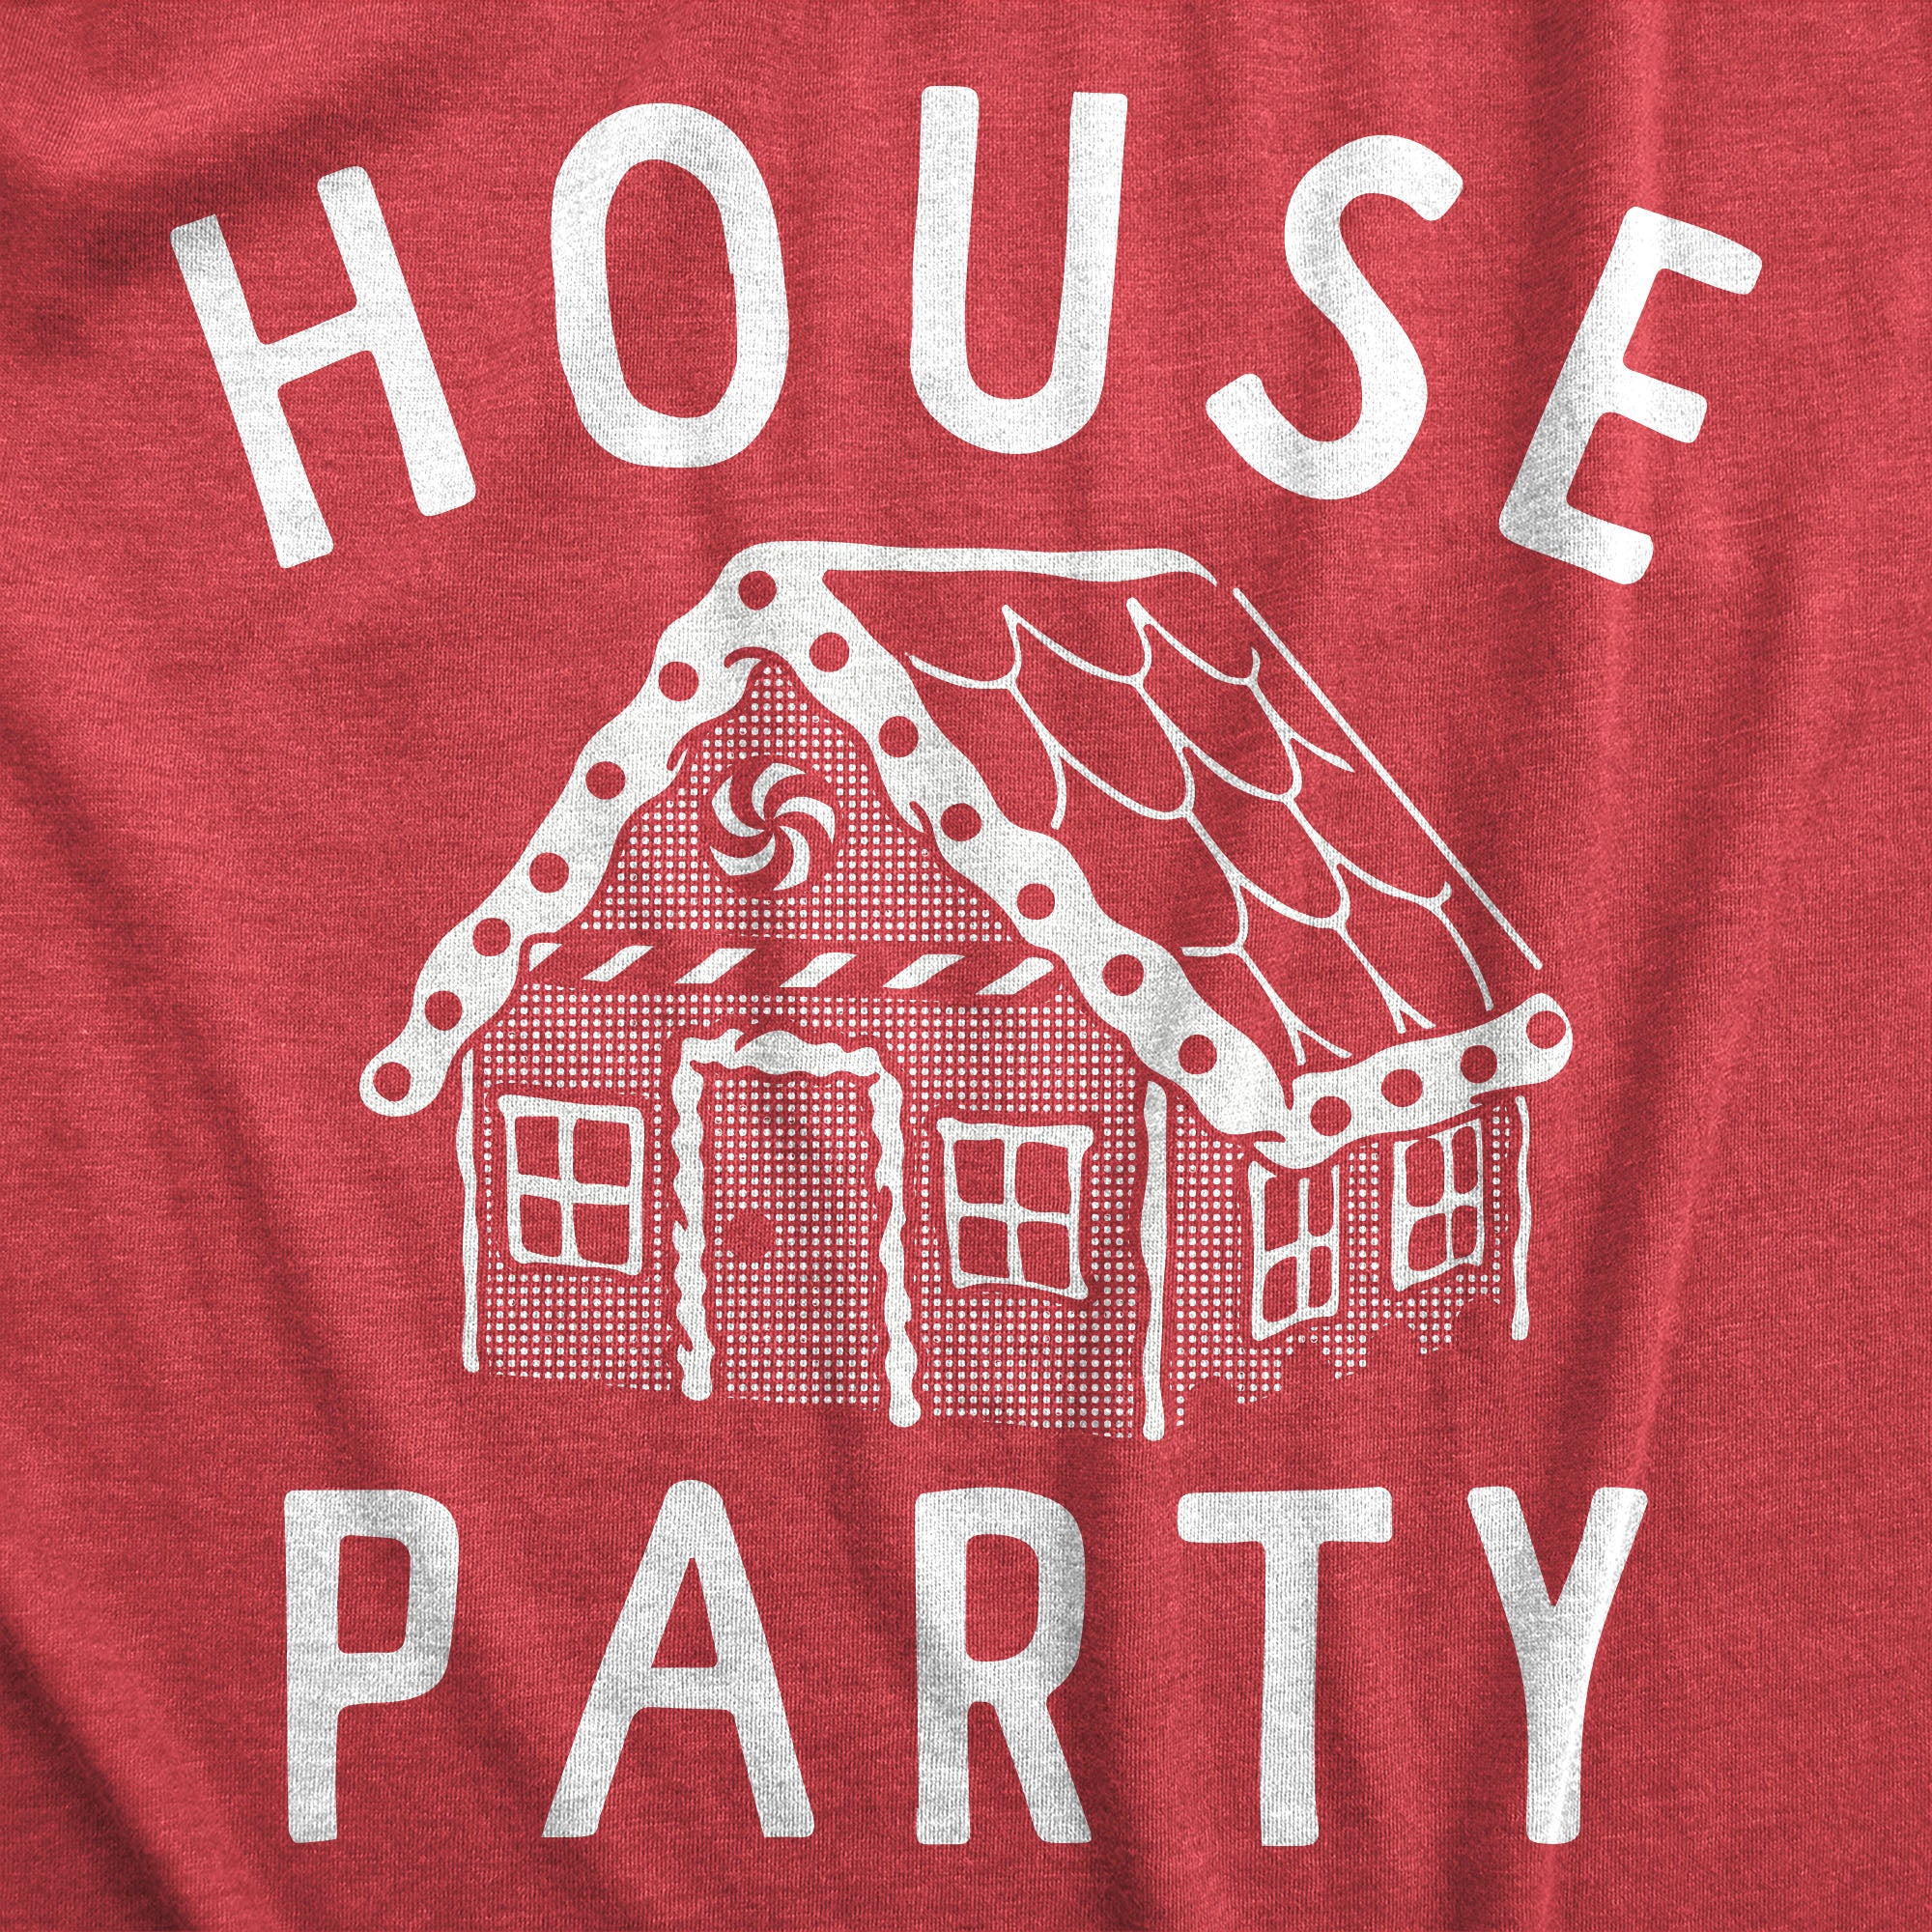 Funny Heather Red - HOUSE House Party Mens T Shirt Nerdy Christmas Sarcastic Tee